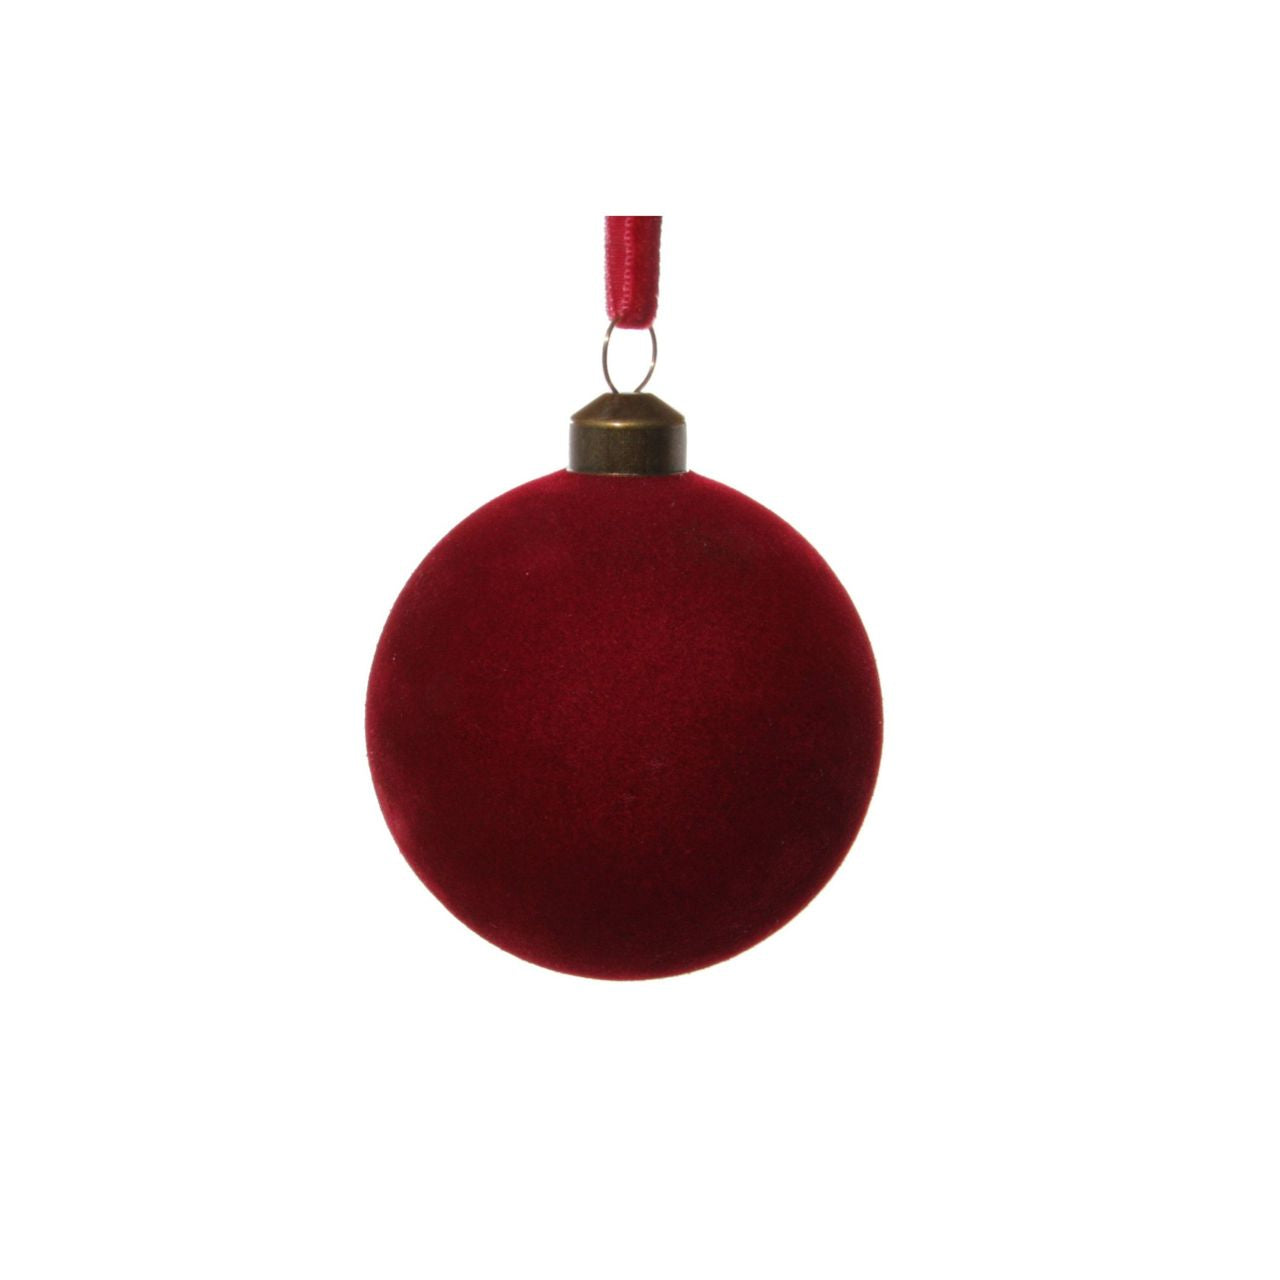 Shishi Burgundy Velvet Glass Bauble Christmas Hanging Ornament  Browse our beautiful range of luxury festive Christmas tree decorations, baubles & ornaments for your tree this Christmas.